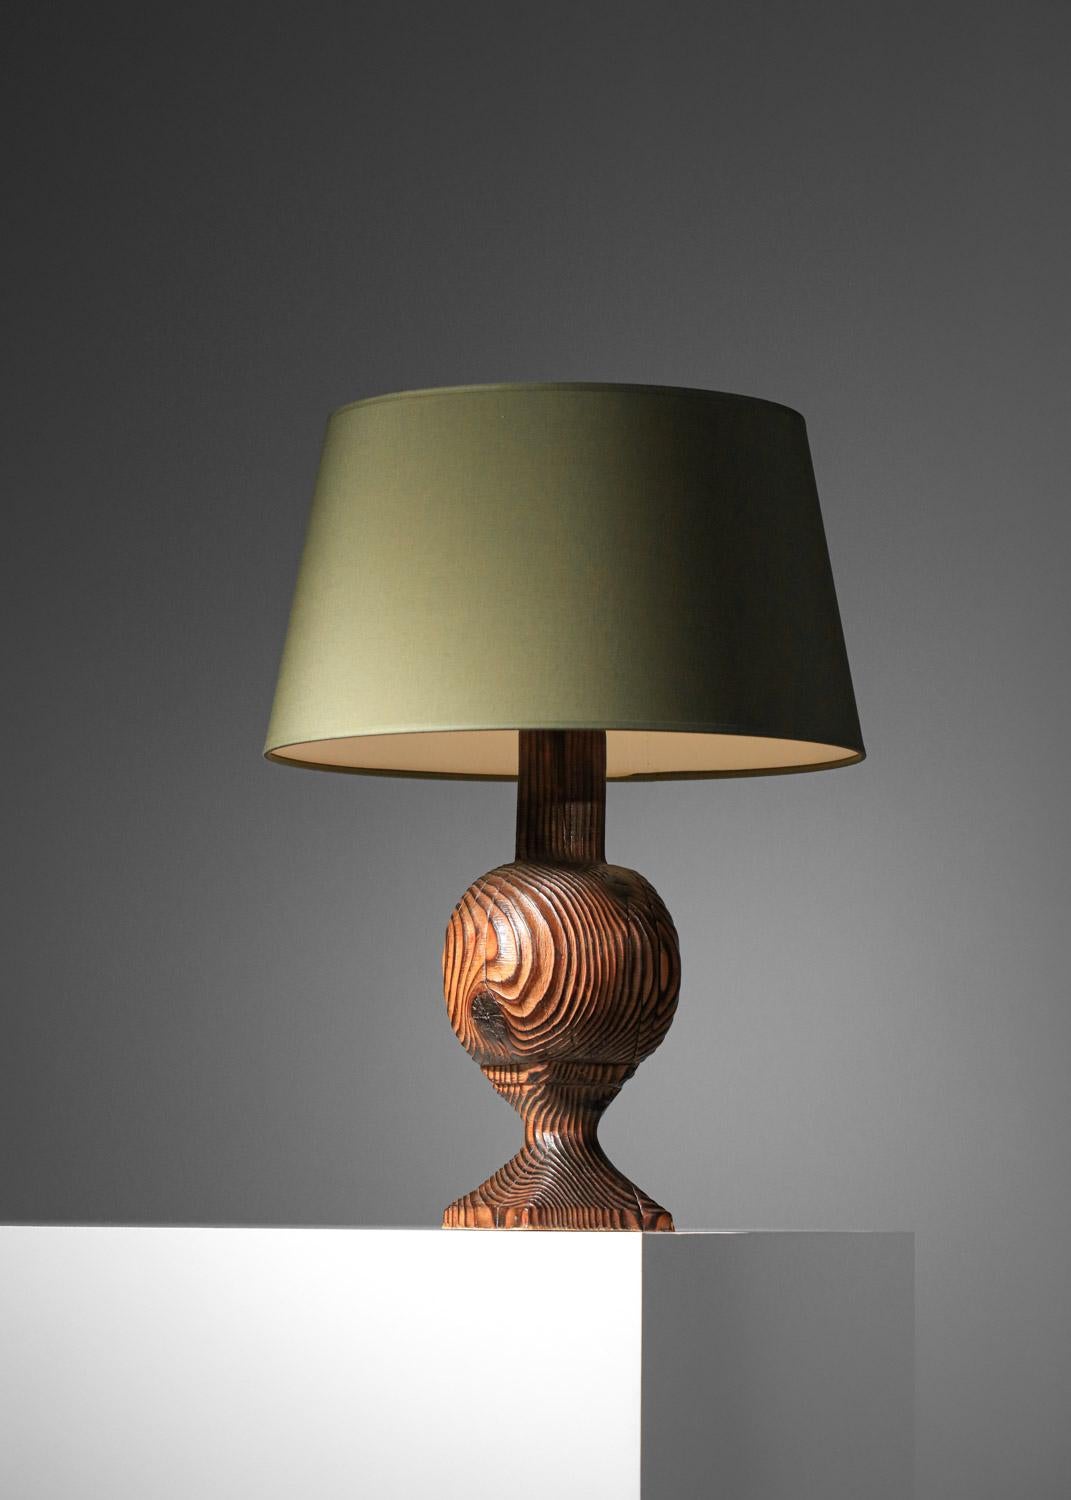 French Brutalist table lamp from the 60s/70s. Burnt-wood base turned from a single piece of wood. Folk art craftsmanship. Beautiful vintage condition with a nice patina on the wood (see photos). Electrical system refurbished, retaining the original